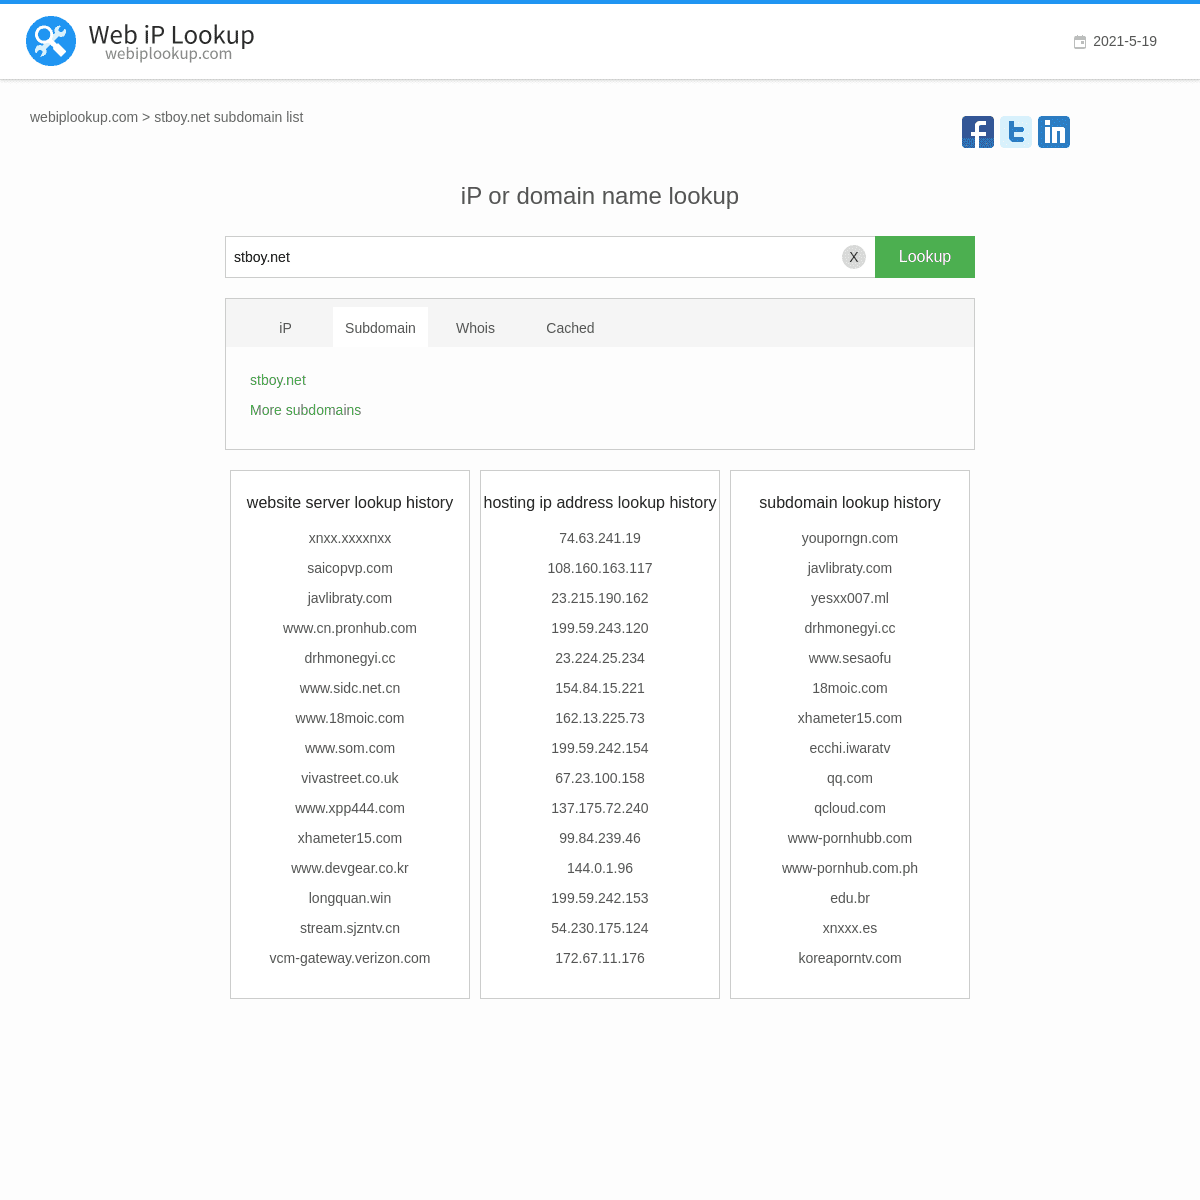 A complete backup of https://webiplookup.com/stboy.net/domain.htm